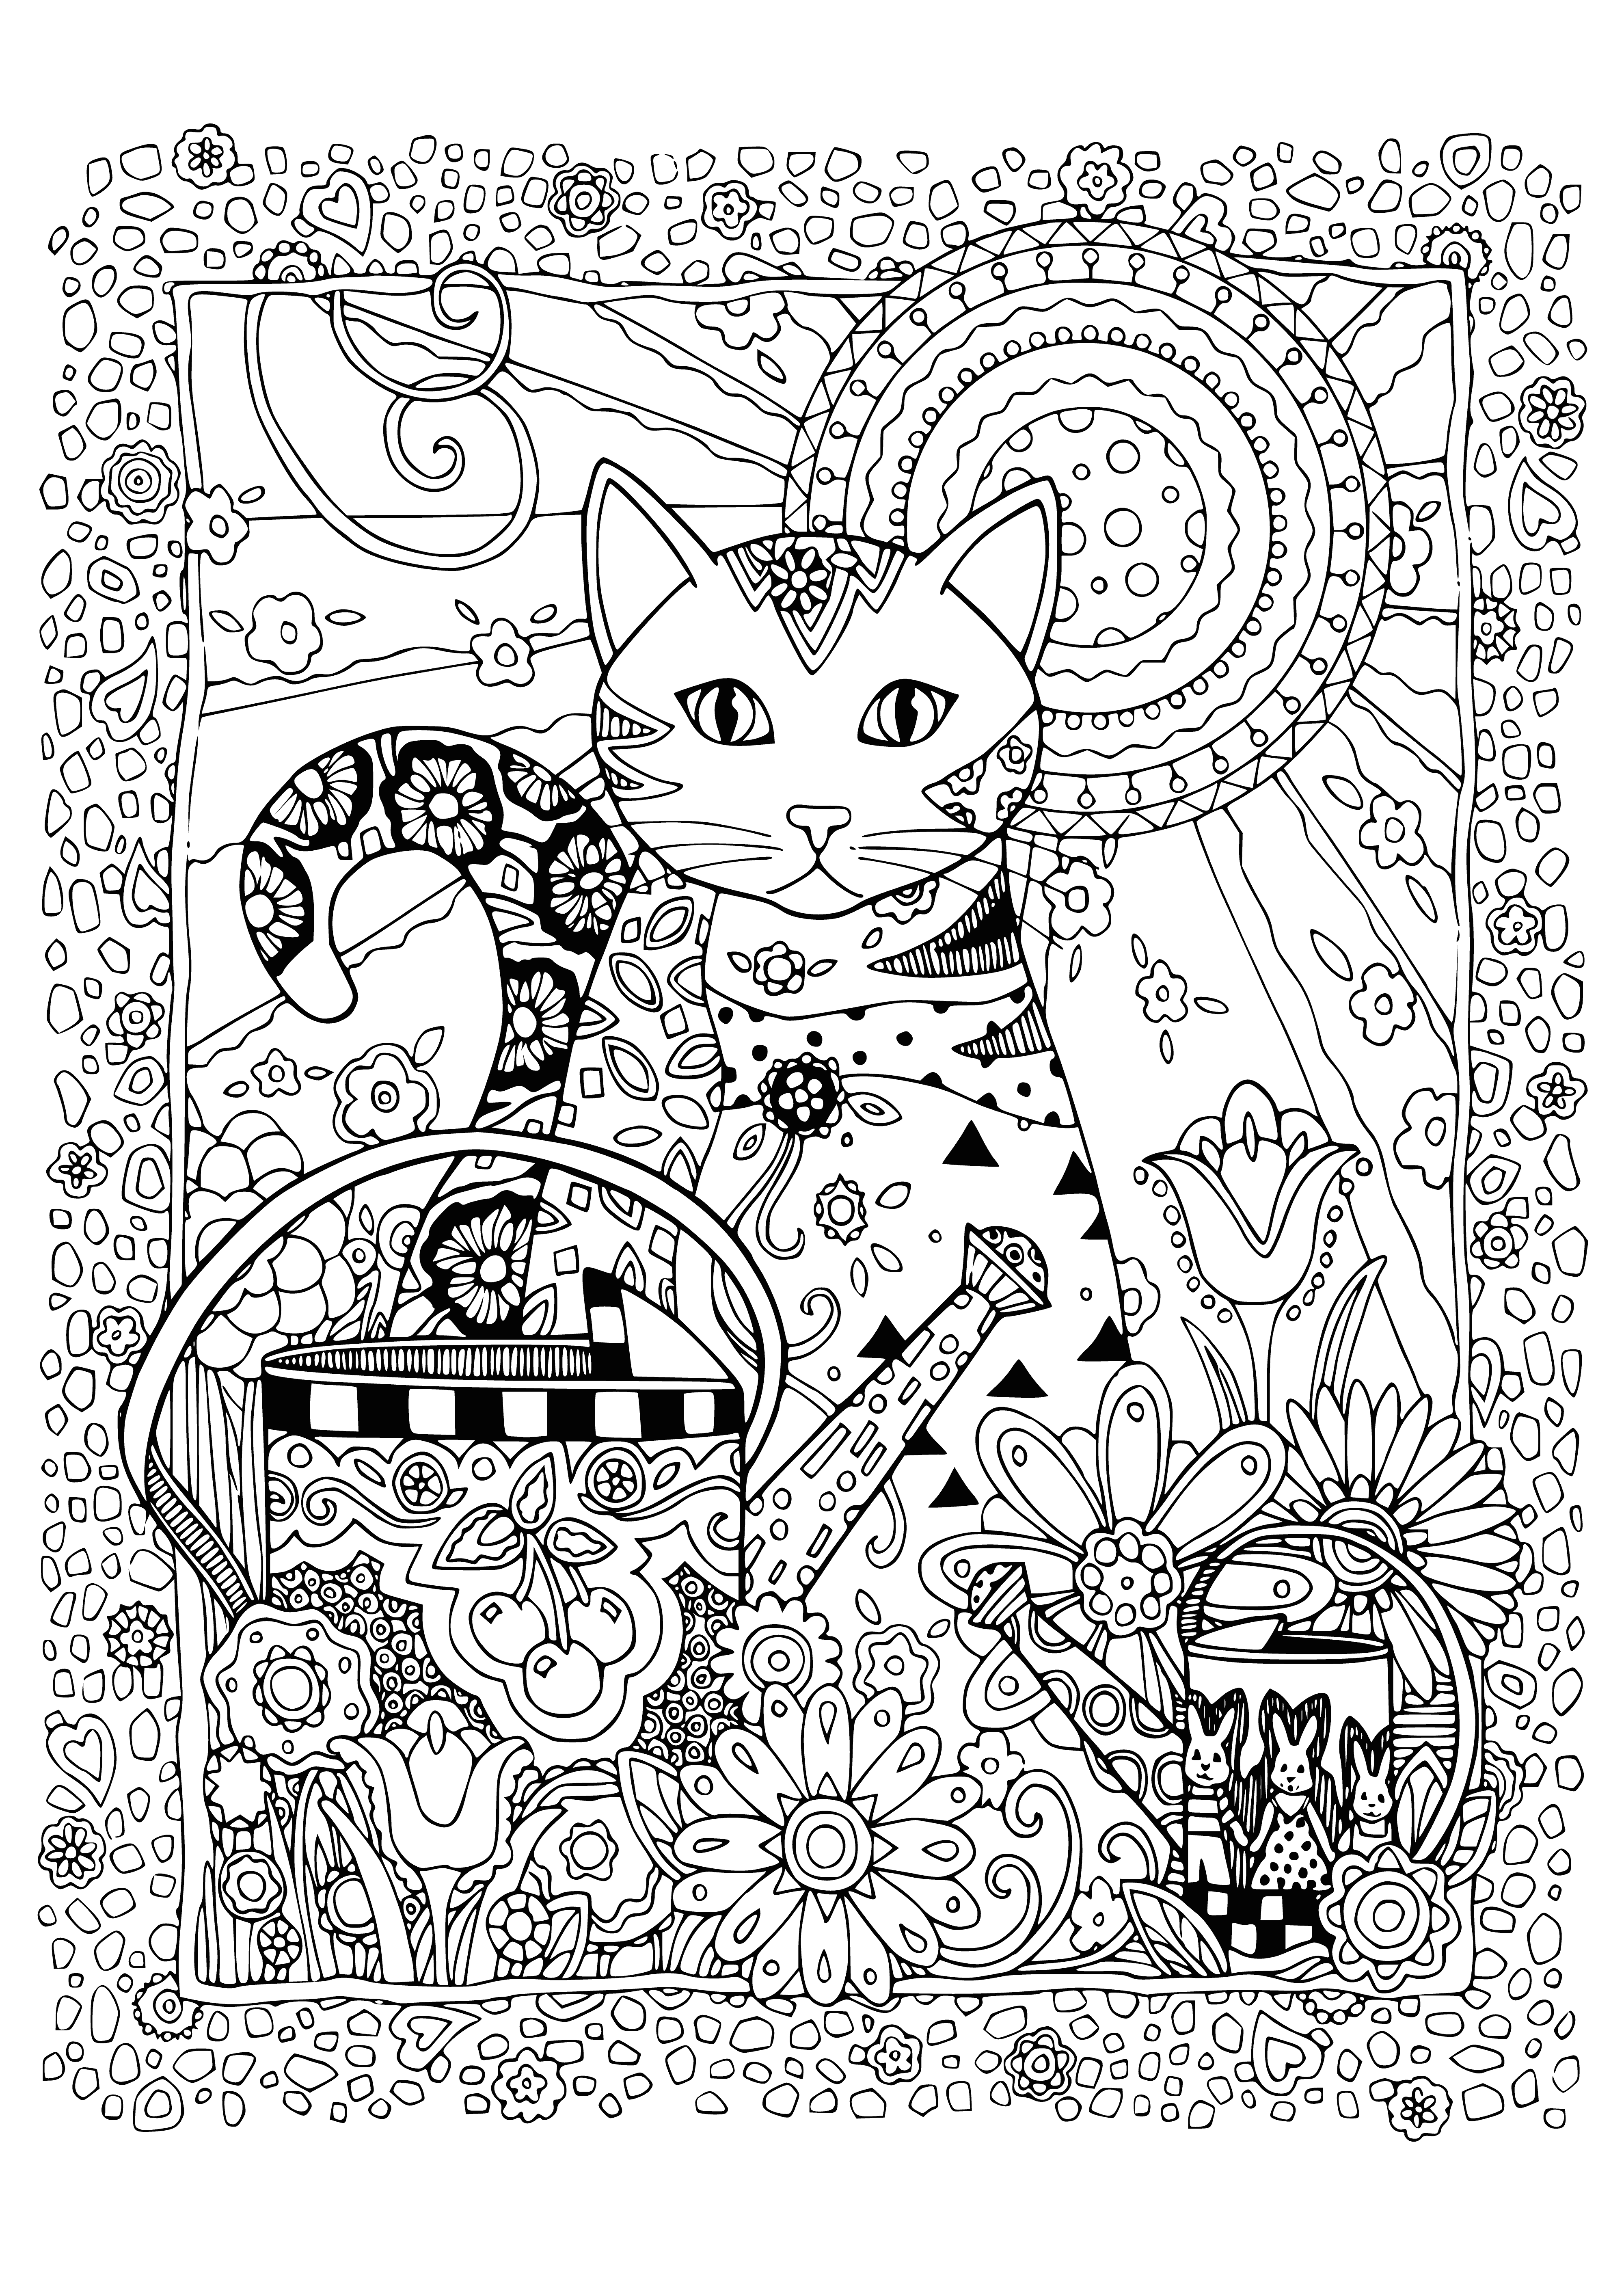 coloring page: #cats #relaxation

Cat relaxes in flowery garden wearing blue collar with bell. #cats #relaxation